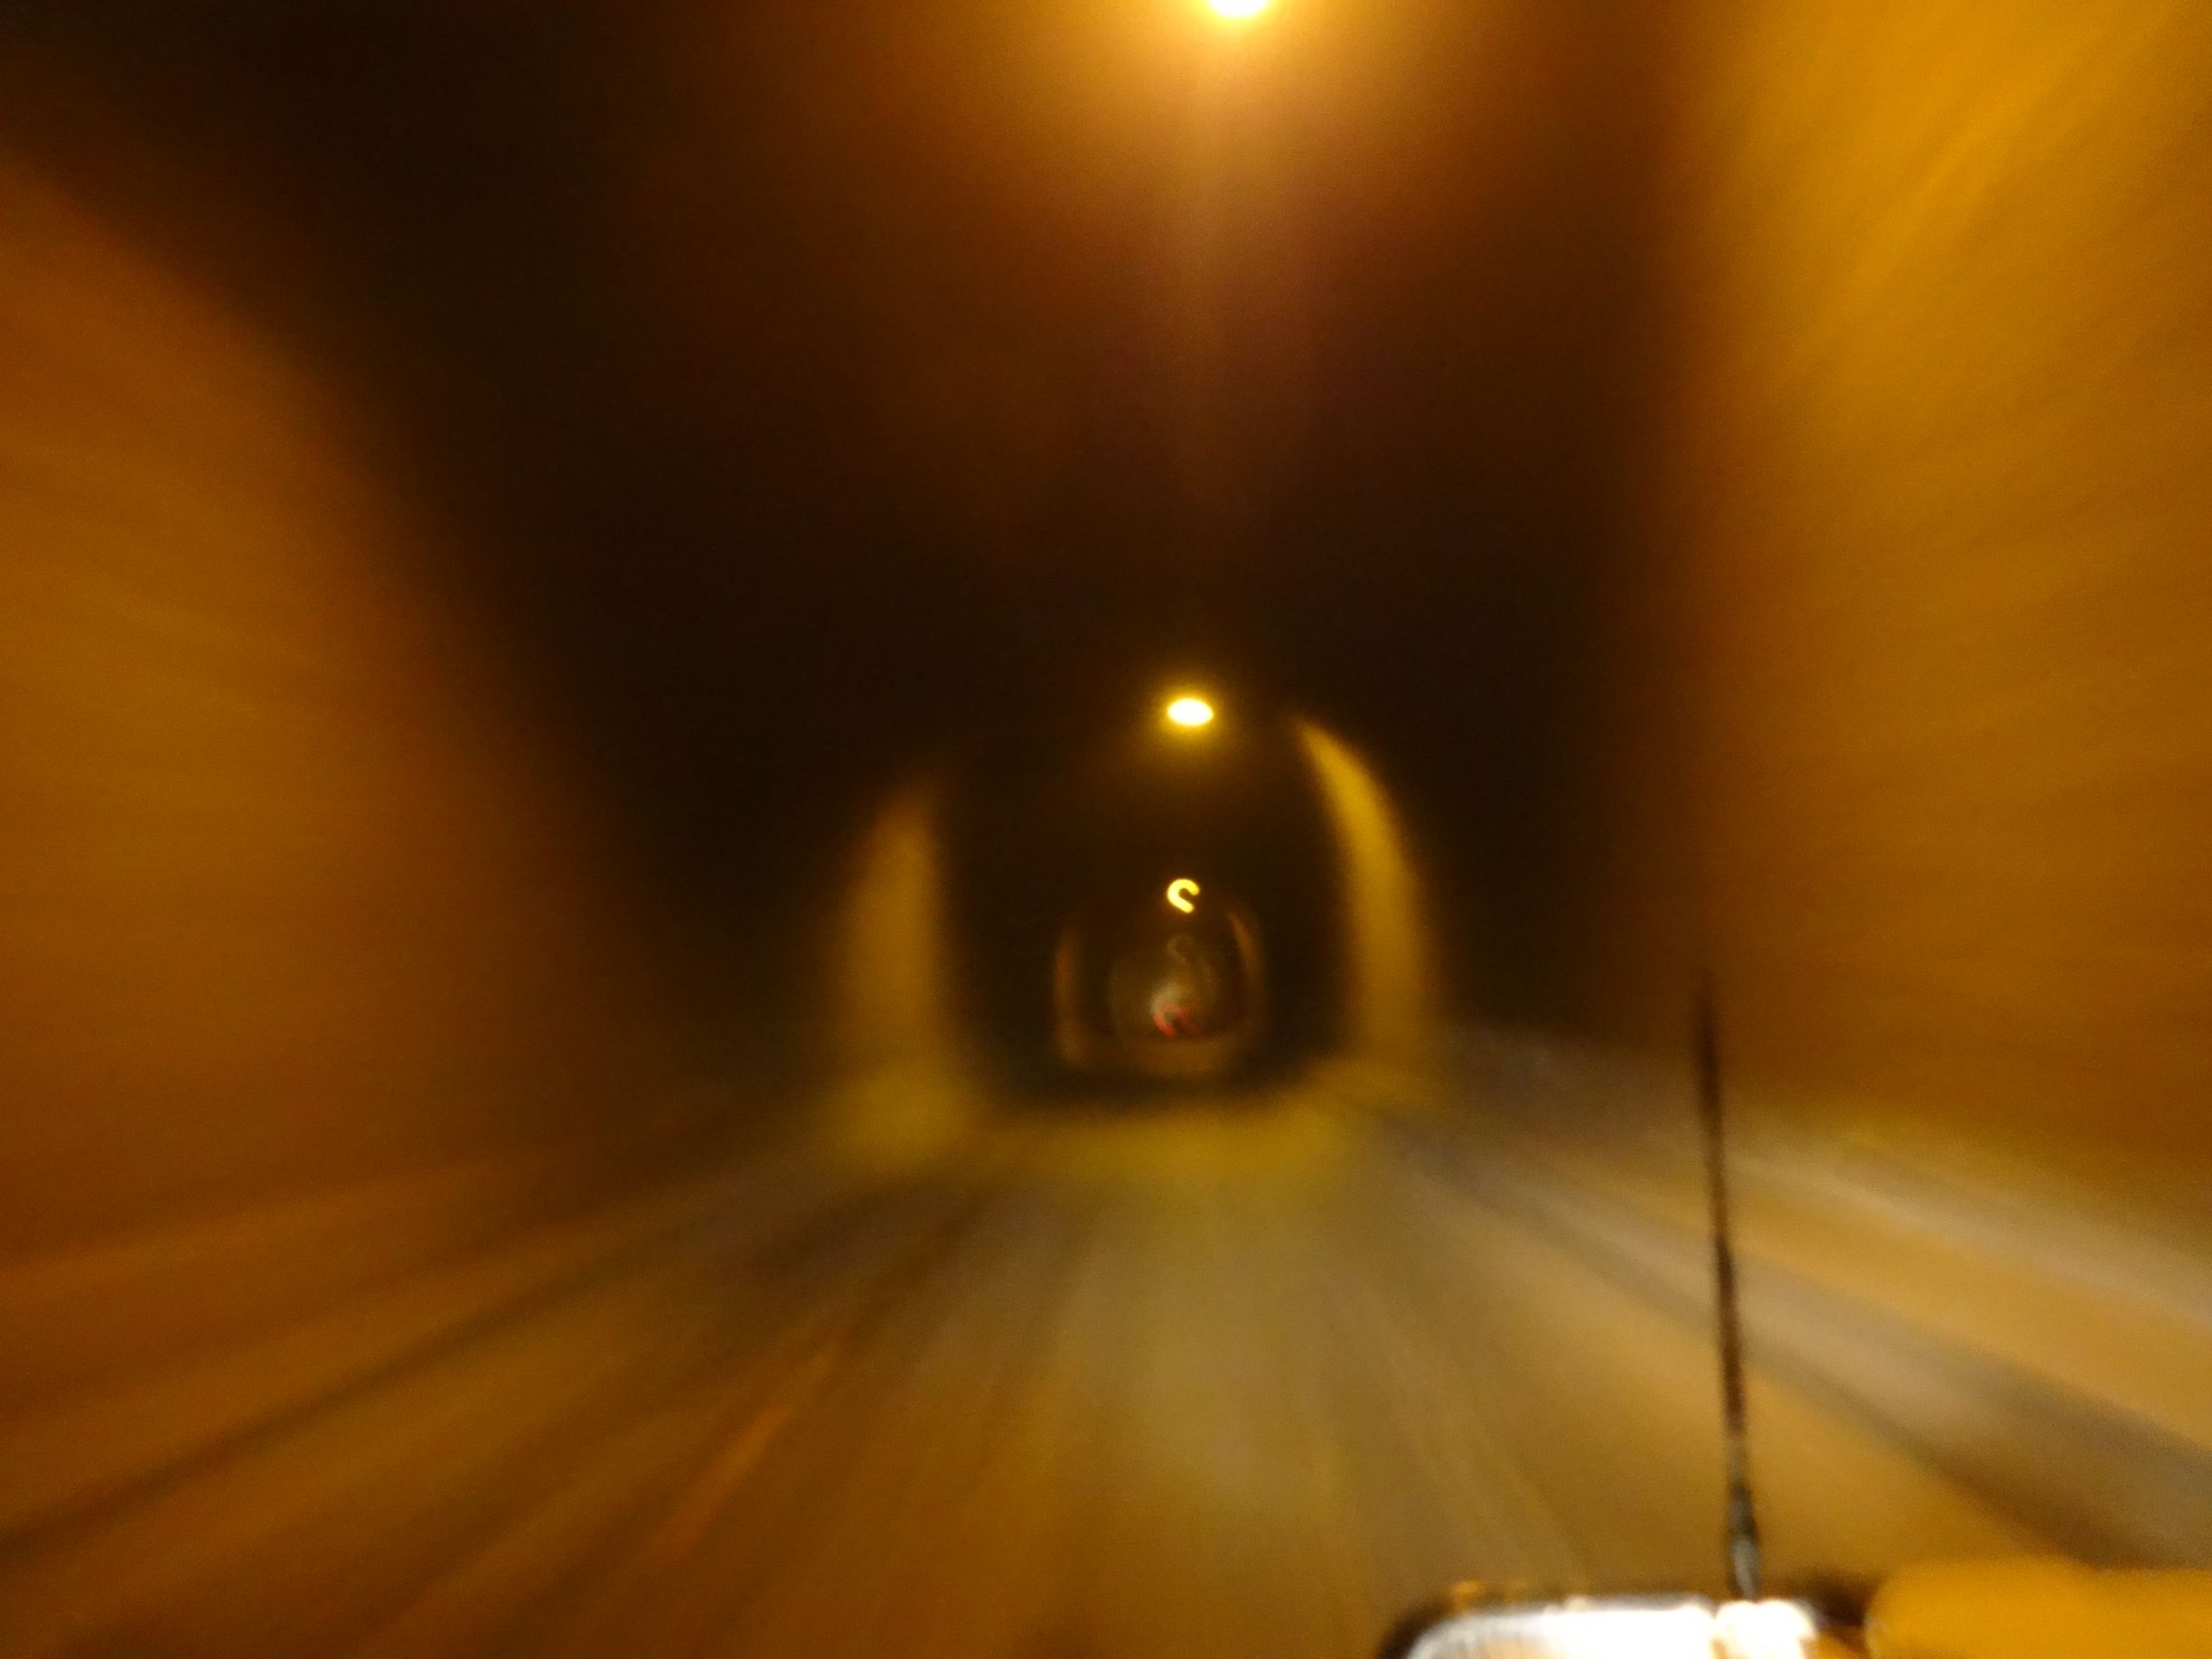 at first we wondered if it was a one-way tunnel with potholes, but then realised it was just wide enough for 2 cars...